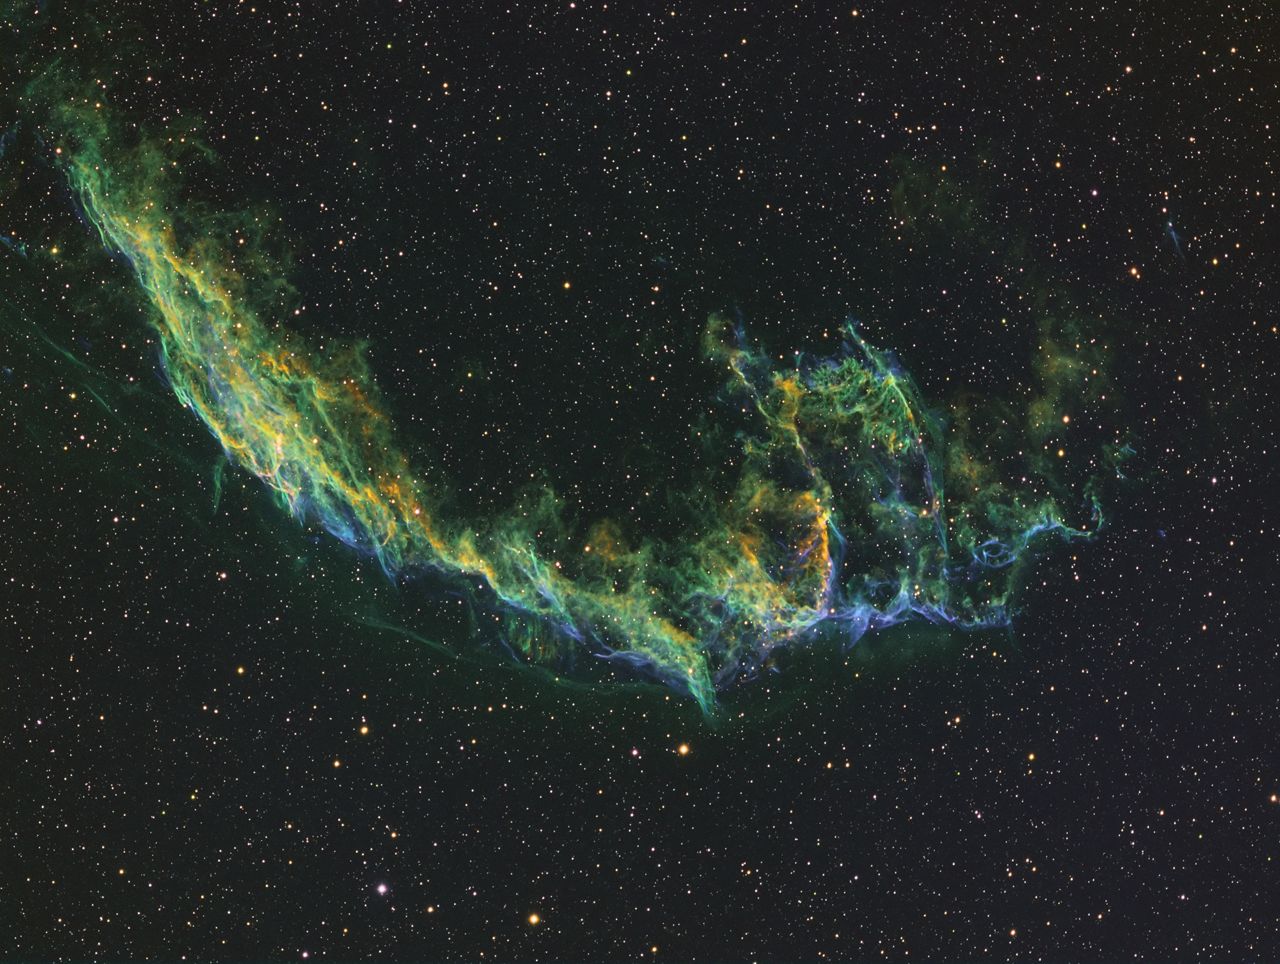 NGC 6992 - The Eastern Veil in HST